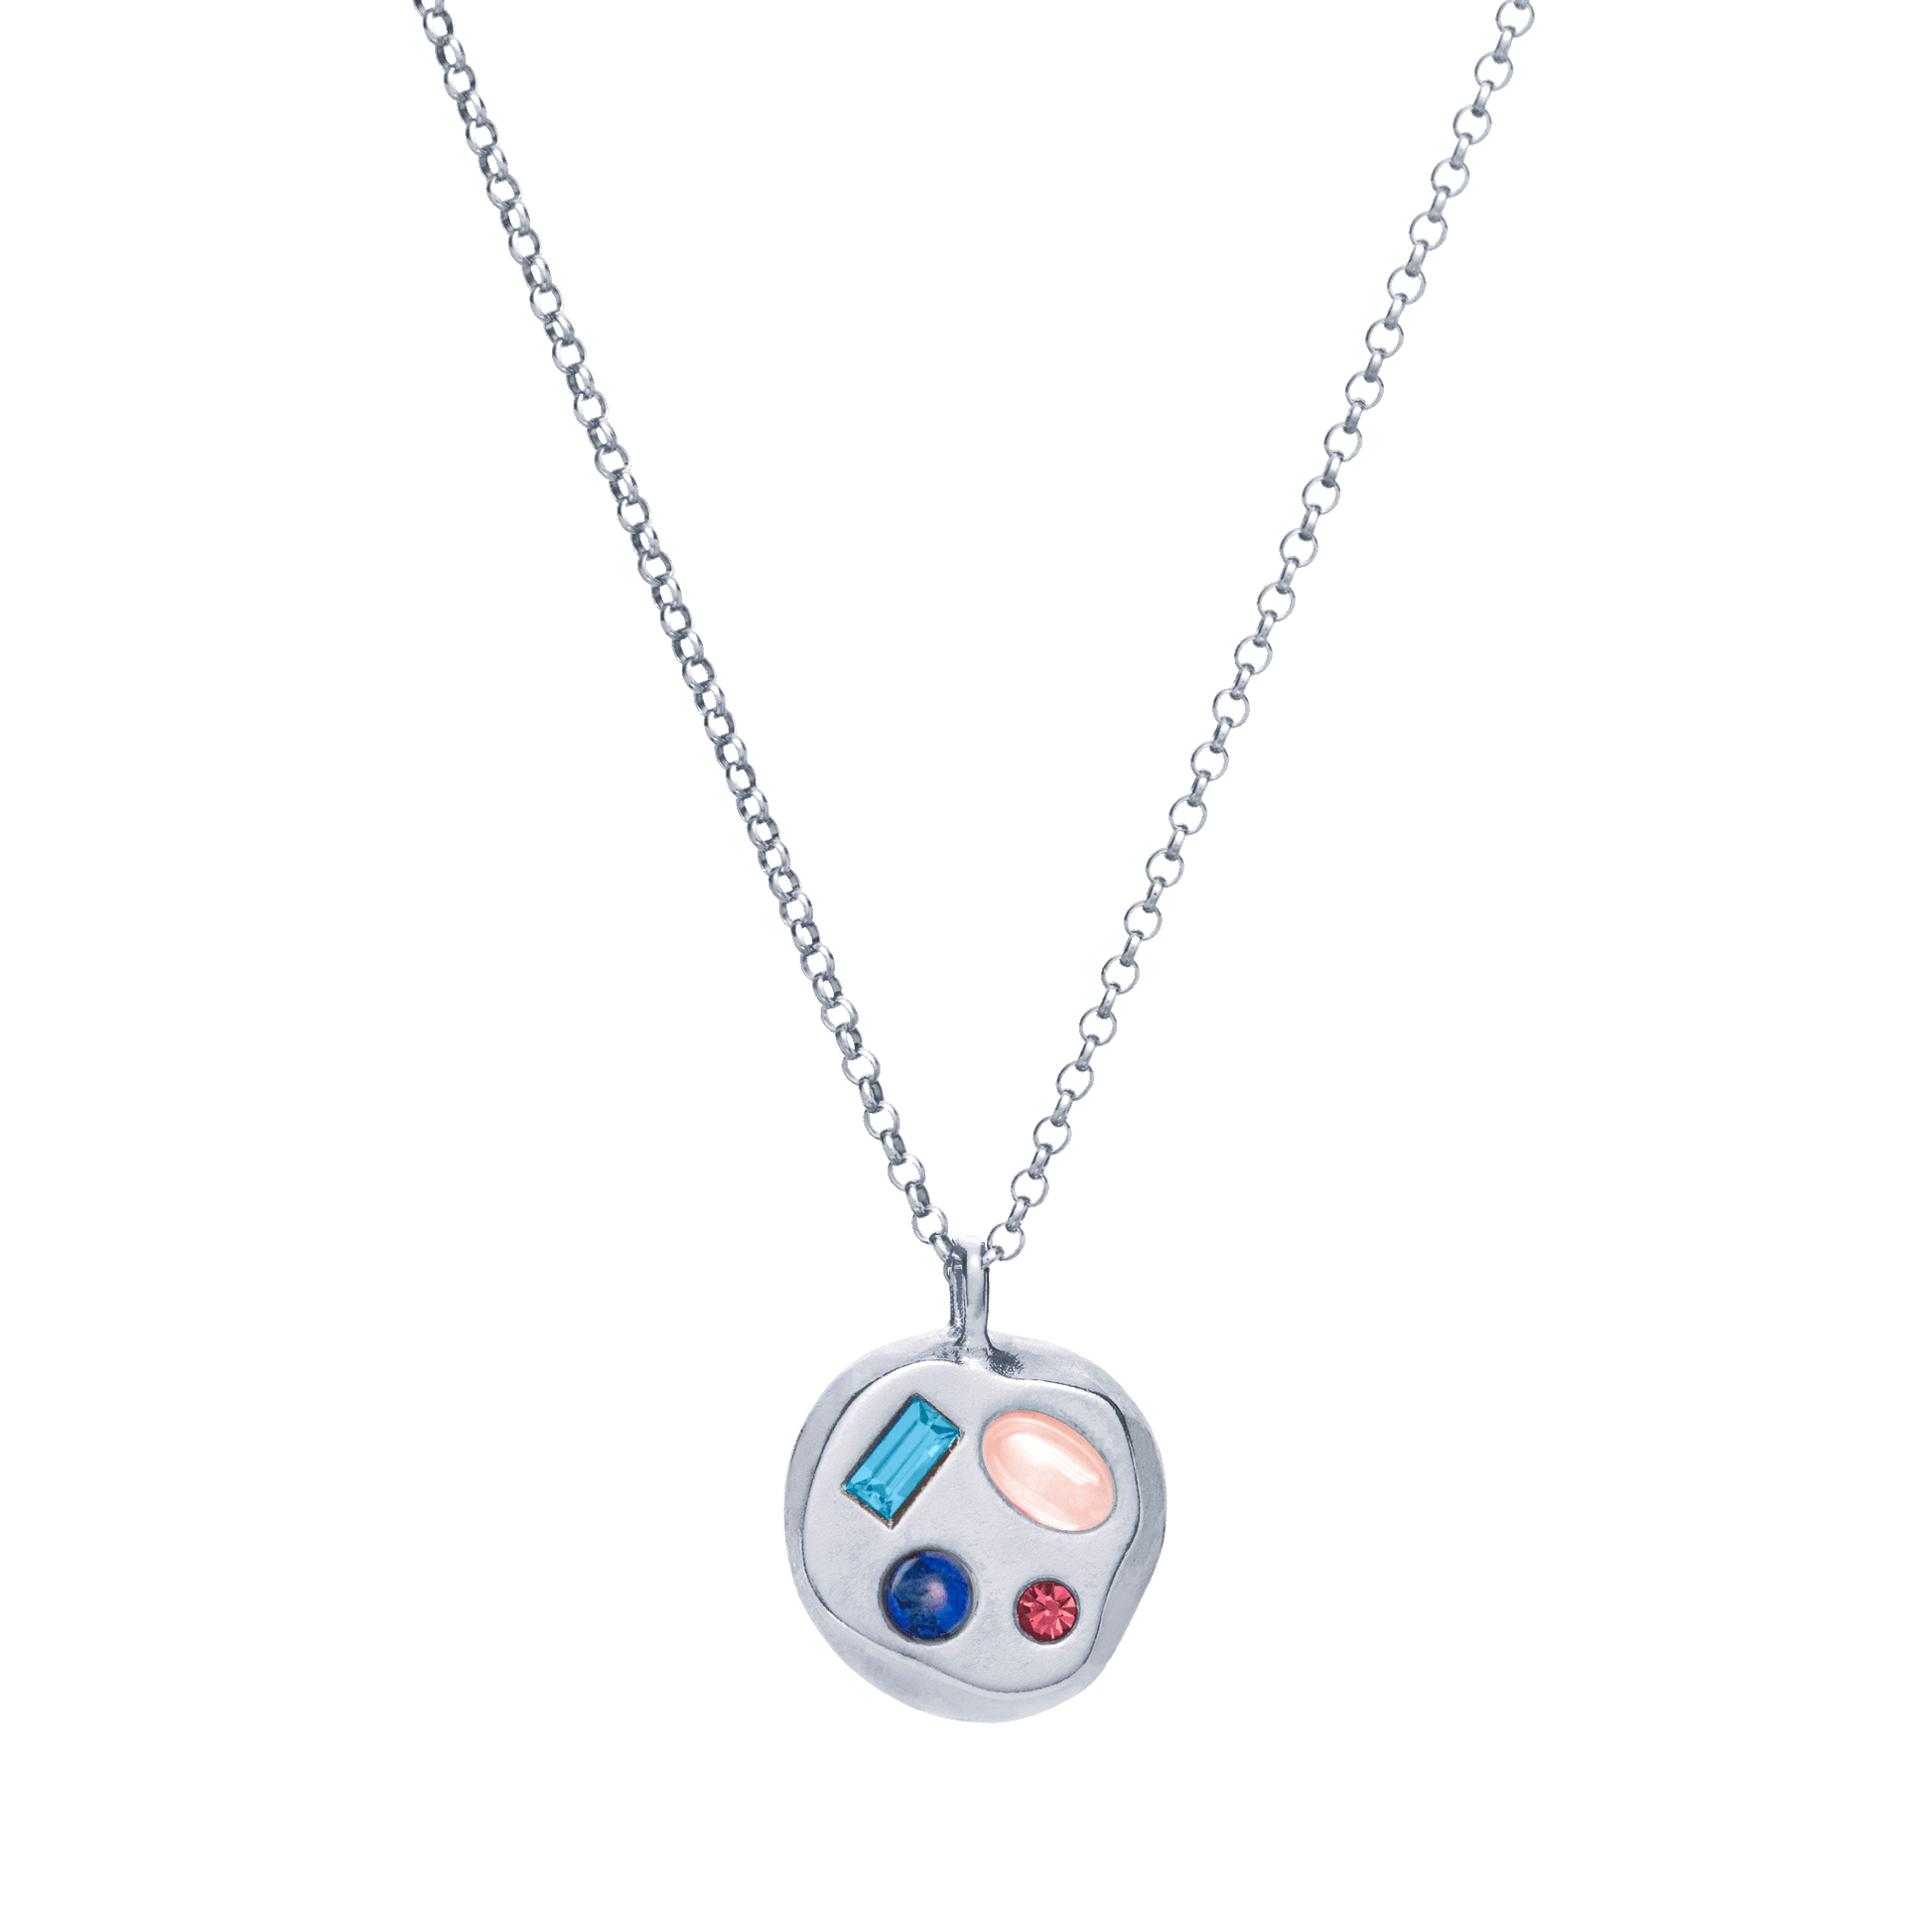 The December Nineteenth Pendant in Sterling Silver